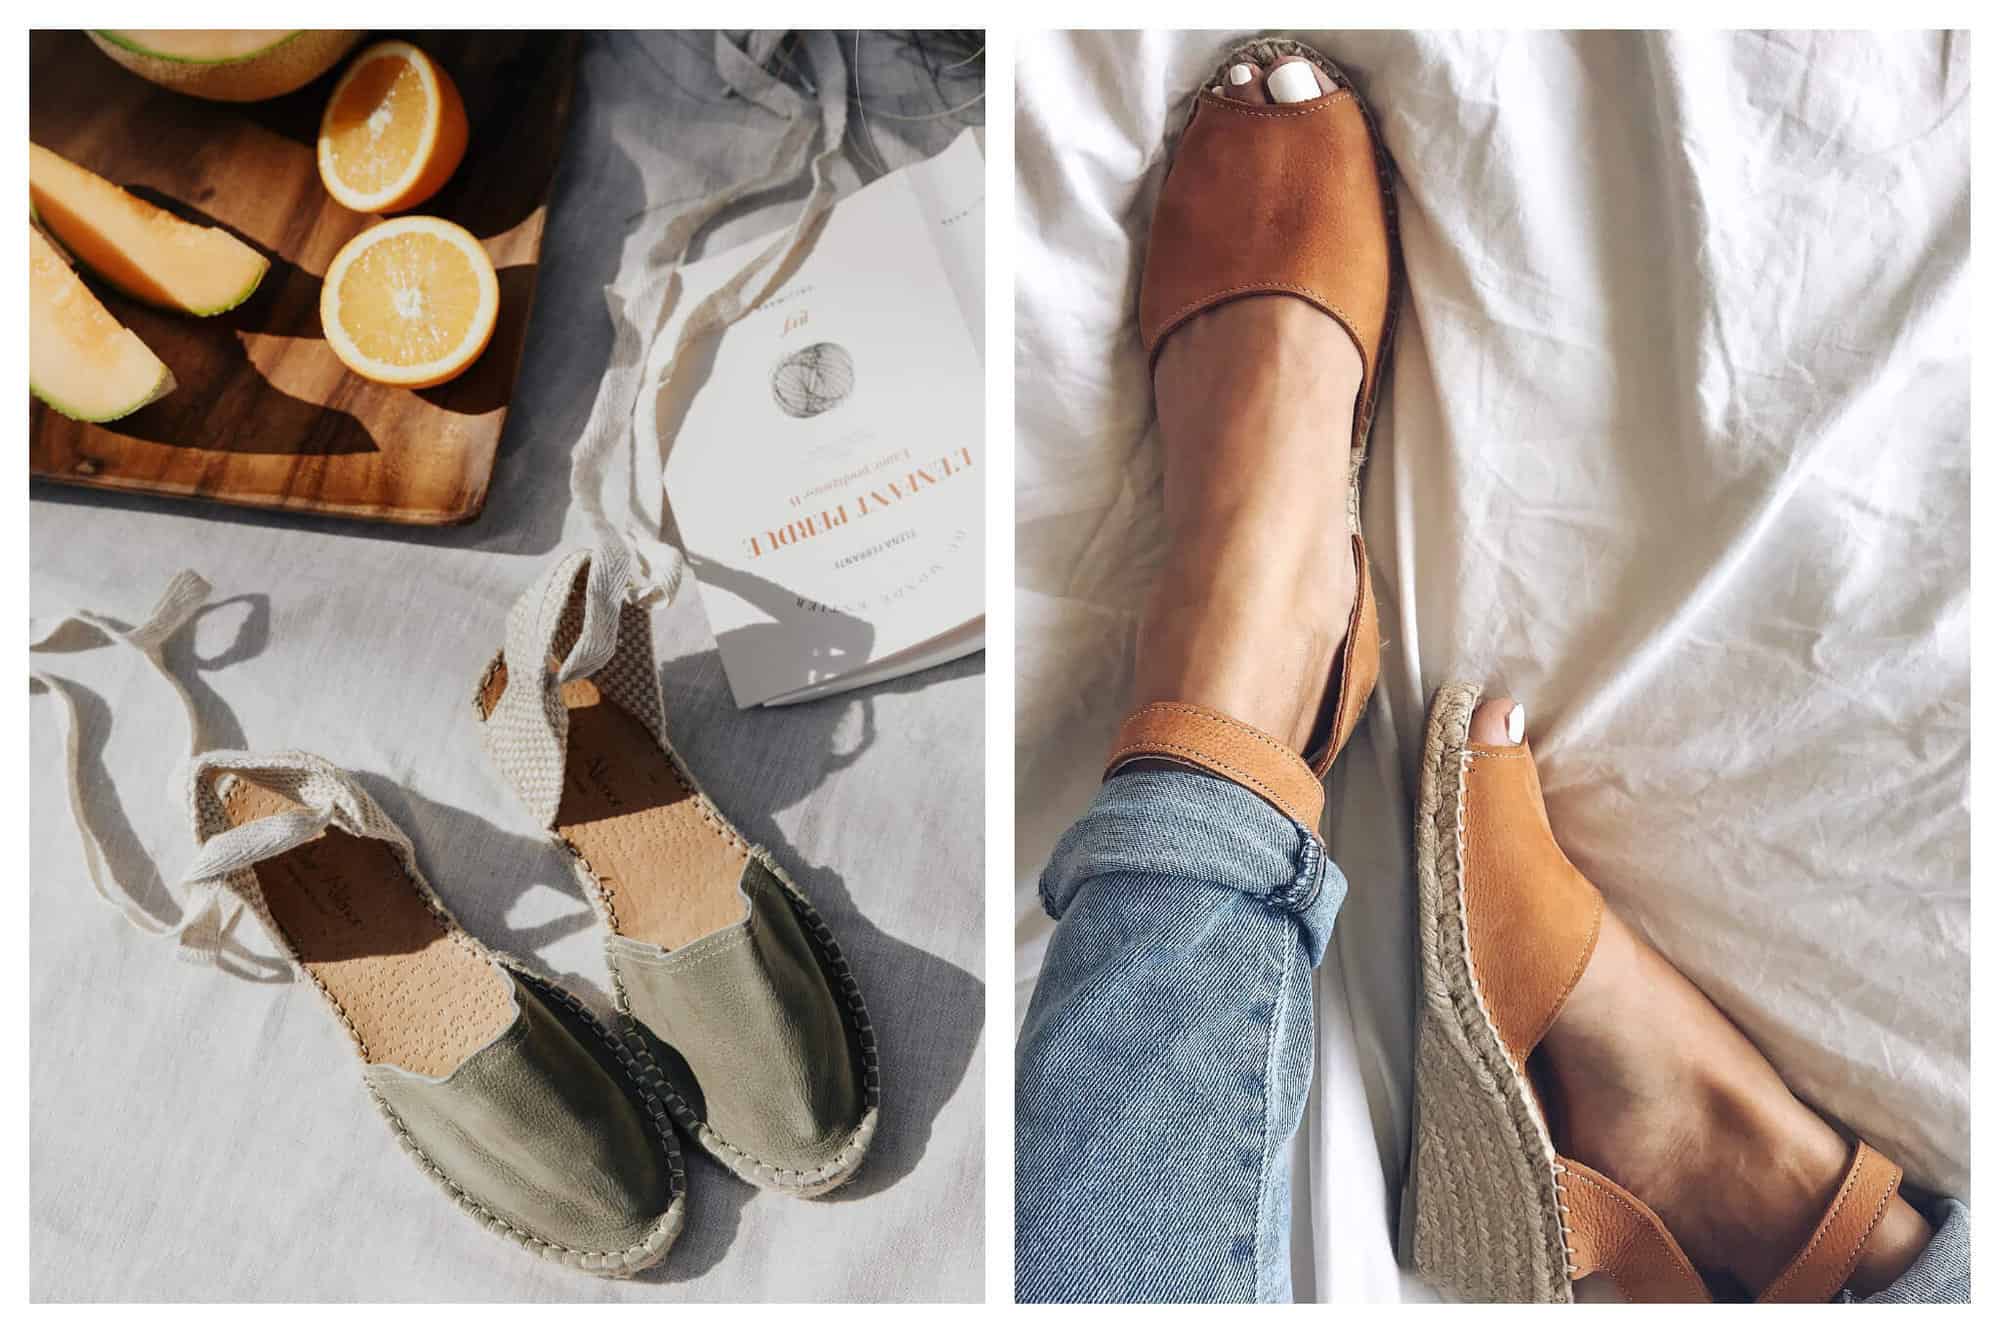 Left: a pair of khaki colored espadrille flats by Atelier Alienor in a flat lay with some sliced melon and oranges and a book. Right: a pair of tan colored wedge espadrilles by Atelier Alienor.  